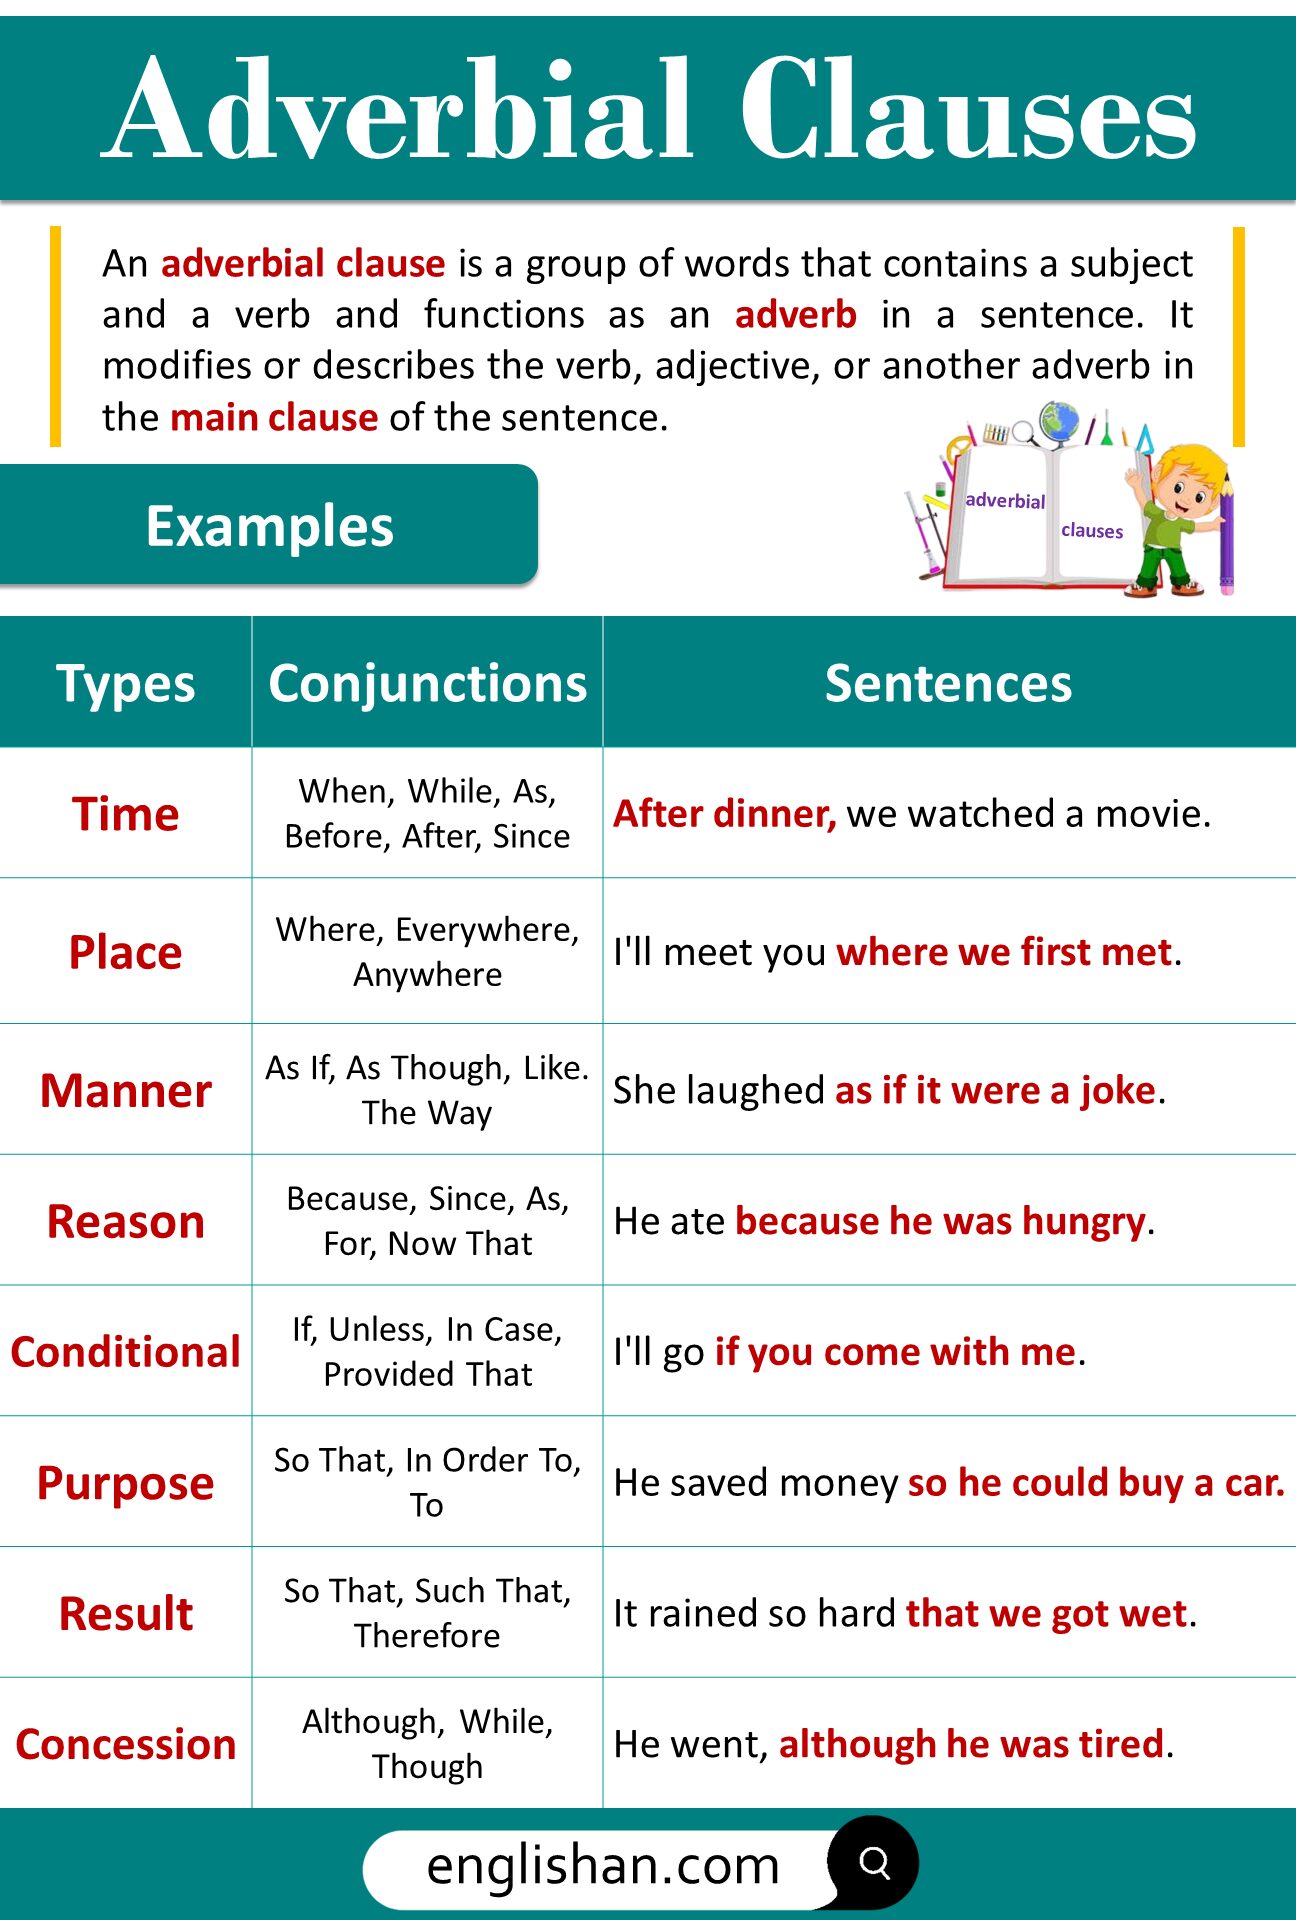 Adverbial Clauses with Types and Examples